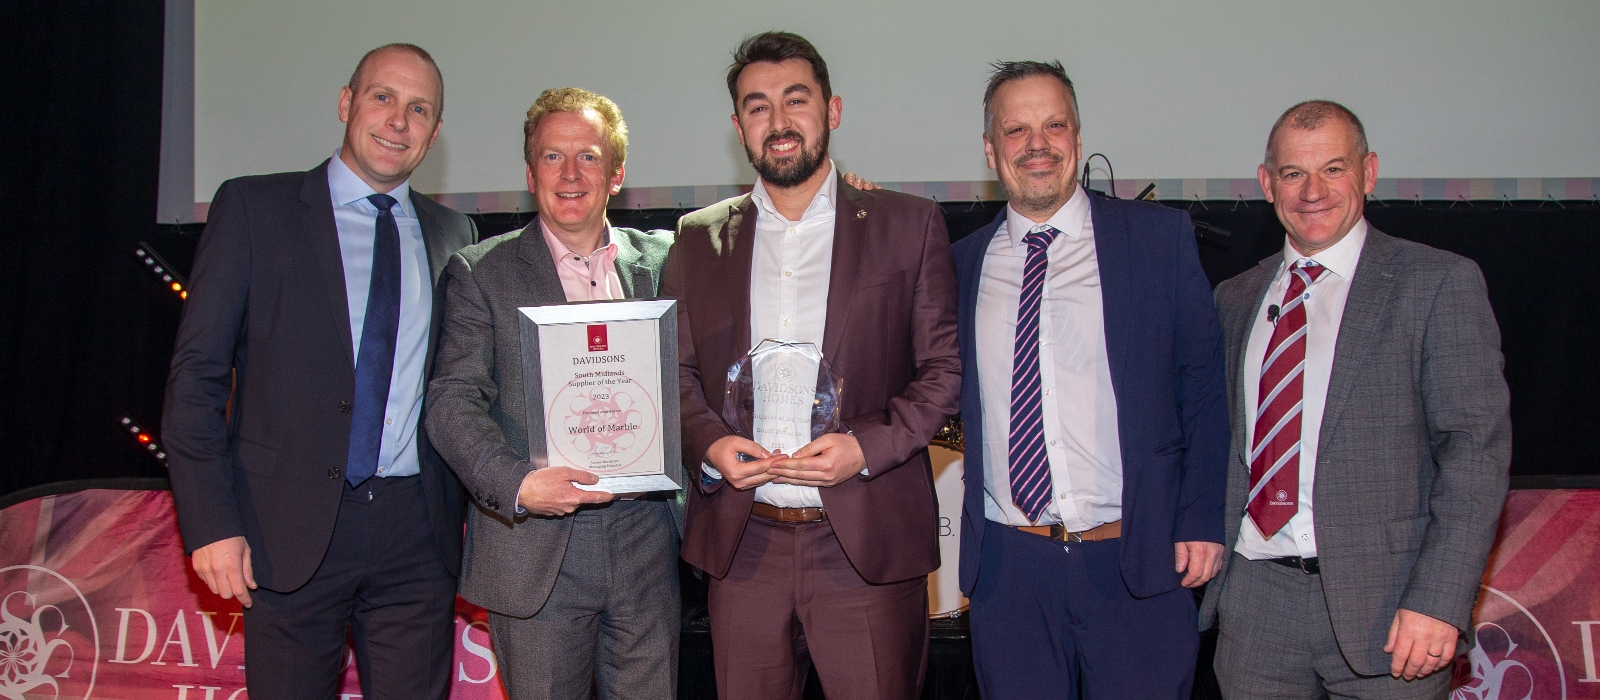 WORLD OF MARBLE WINS “SOUTH MIDLANDS SUPPLIER OF THE YEAR” AT DAVIDSONS HOMES AWARDS EVENING